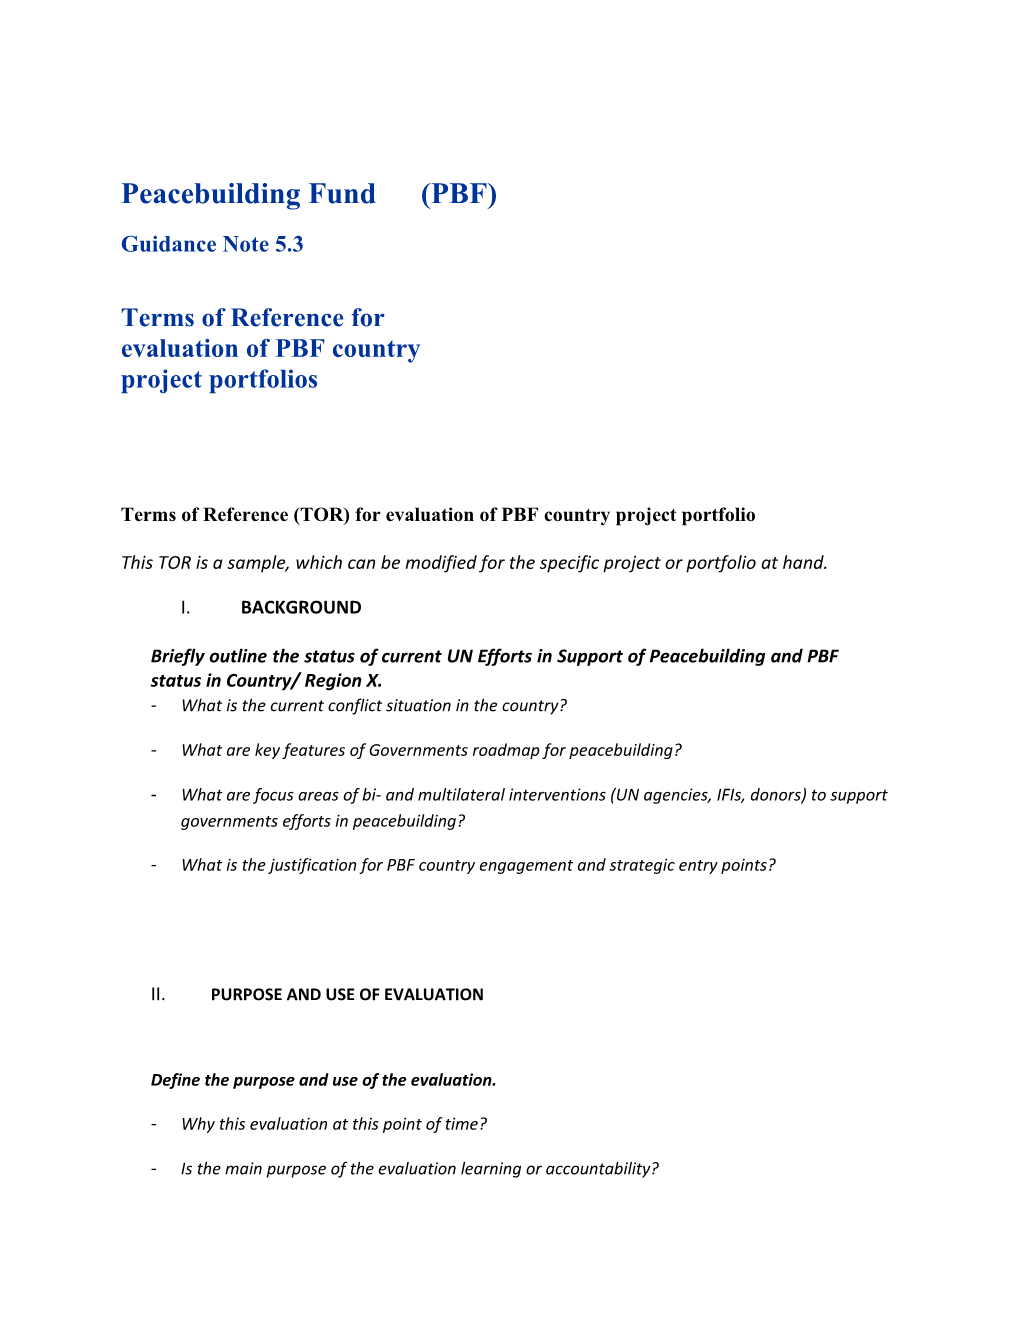 Terms of Reference for Evaluation of PBF Country Project Portfolios